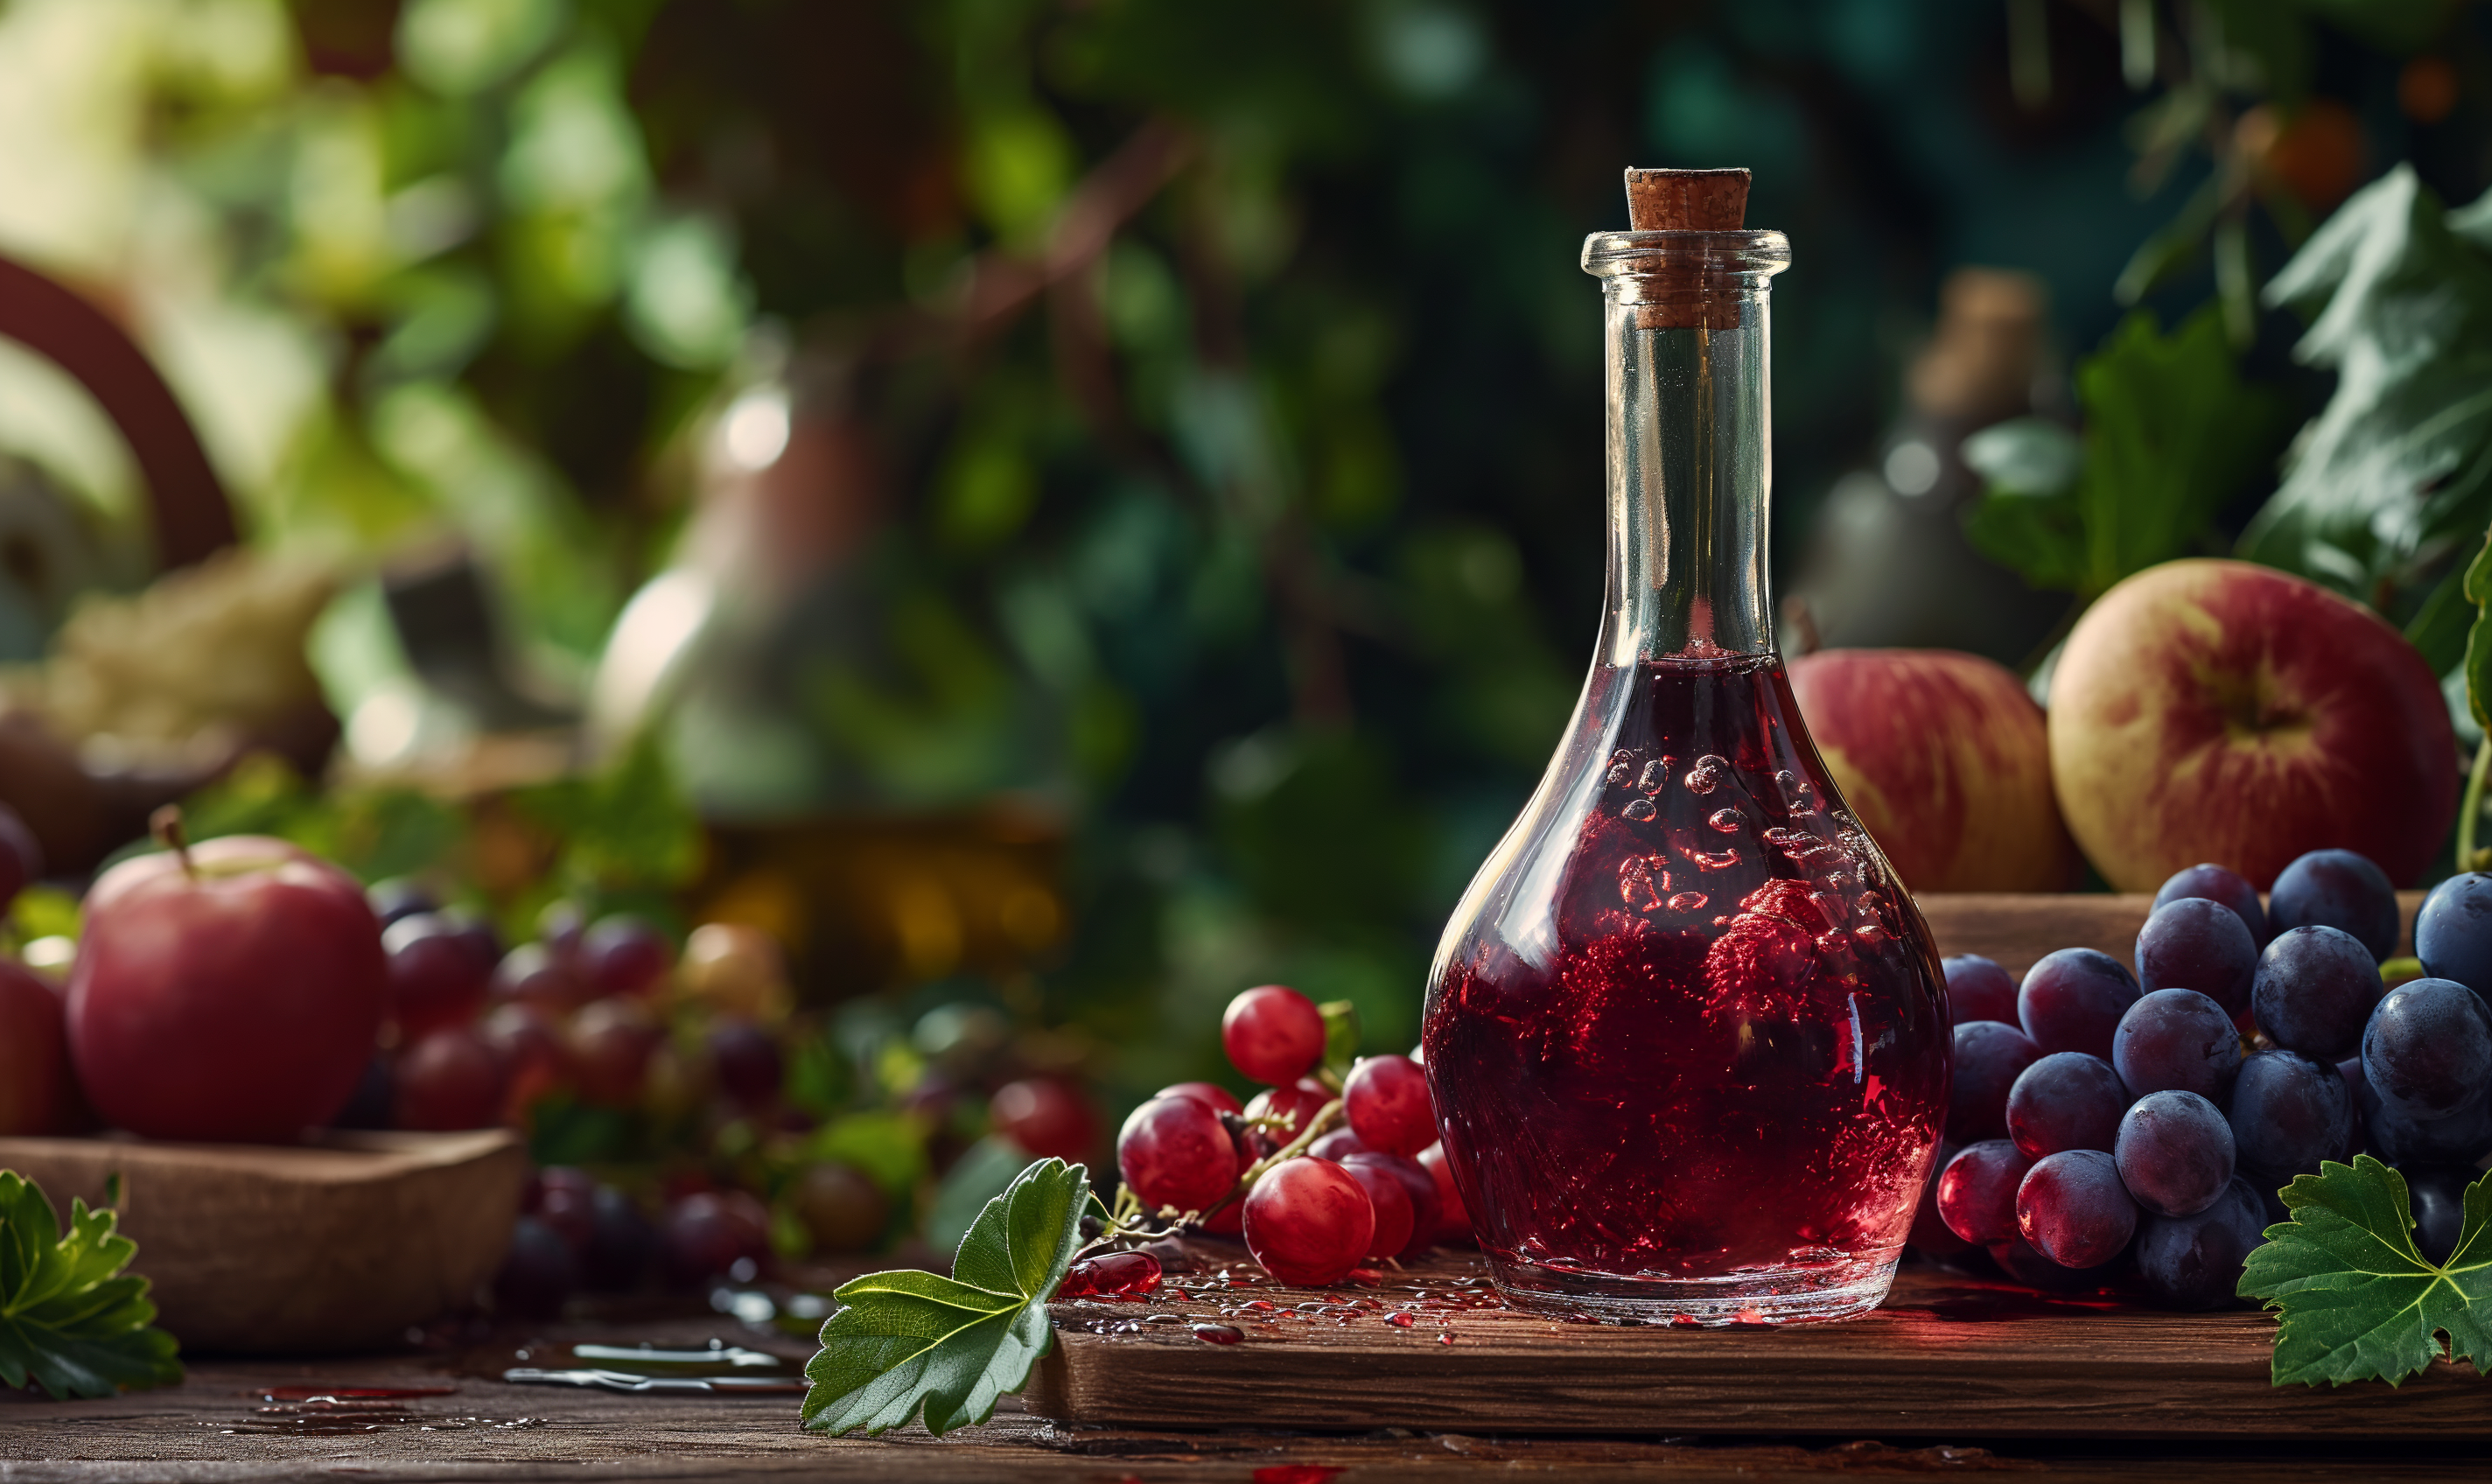 an image that blends the scientific with the natural, illustrating the health benefits of red wine vinegar. Show a juxtaposition of the organic, earthy origins of the vinegar with the precise, beneficial effects it has on the body. 